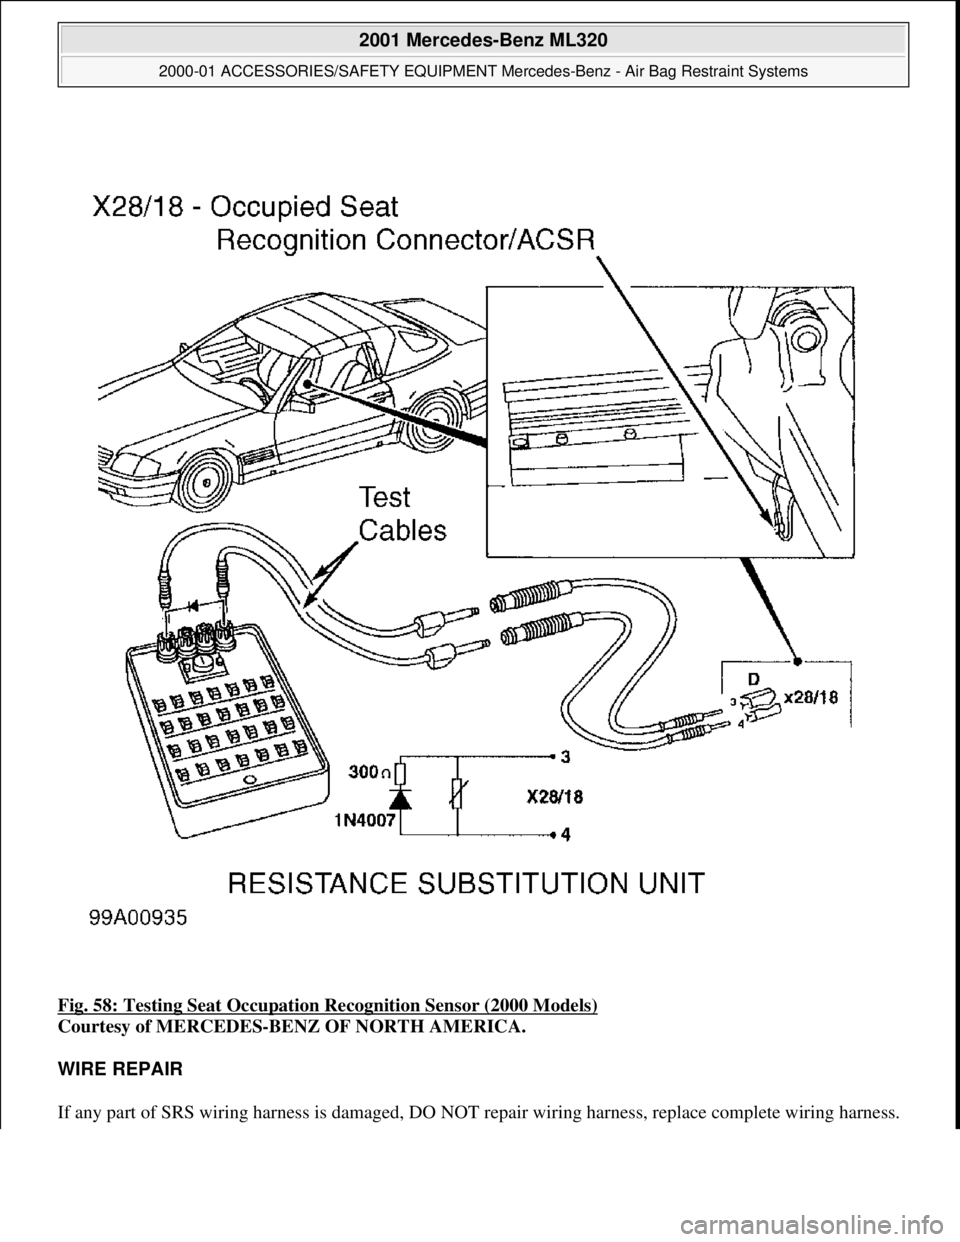 MERCEDES-BENZ ML500 1997  Complete Owners Manual Fig. 58: Testing Seat Occupation  Recognition Sensor (2000 Models)  
Courtesy of MERCEDES-BENZ OF NORTH AMERICA.    
WIRE REPAIR  
If any part of SRS wiring harness is damaged, DO NOT   repair wiring 